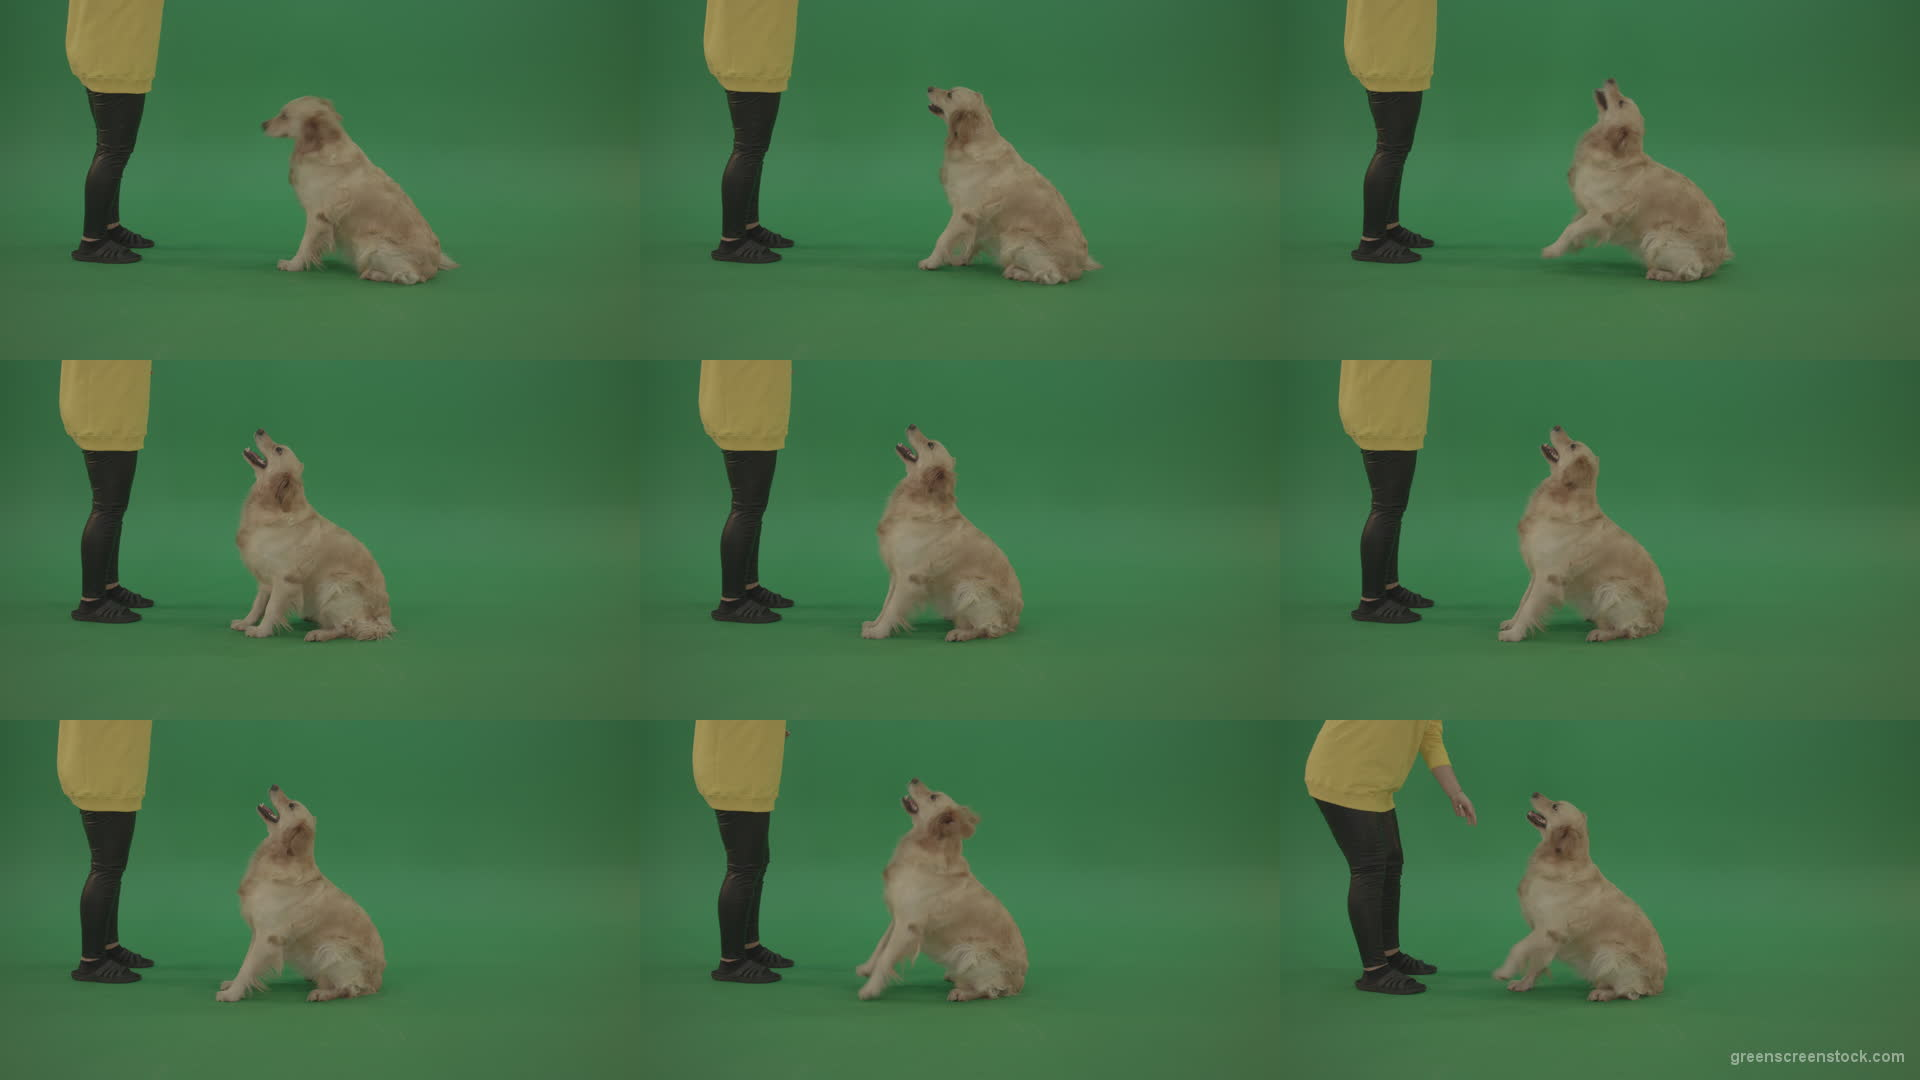 Golden-Retriever-hunter-Bird-Dog-sit-and-barking-to-owner-isolated-on-green-screen-4K-video-footage Green Screen Stock